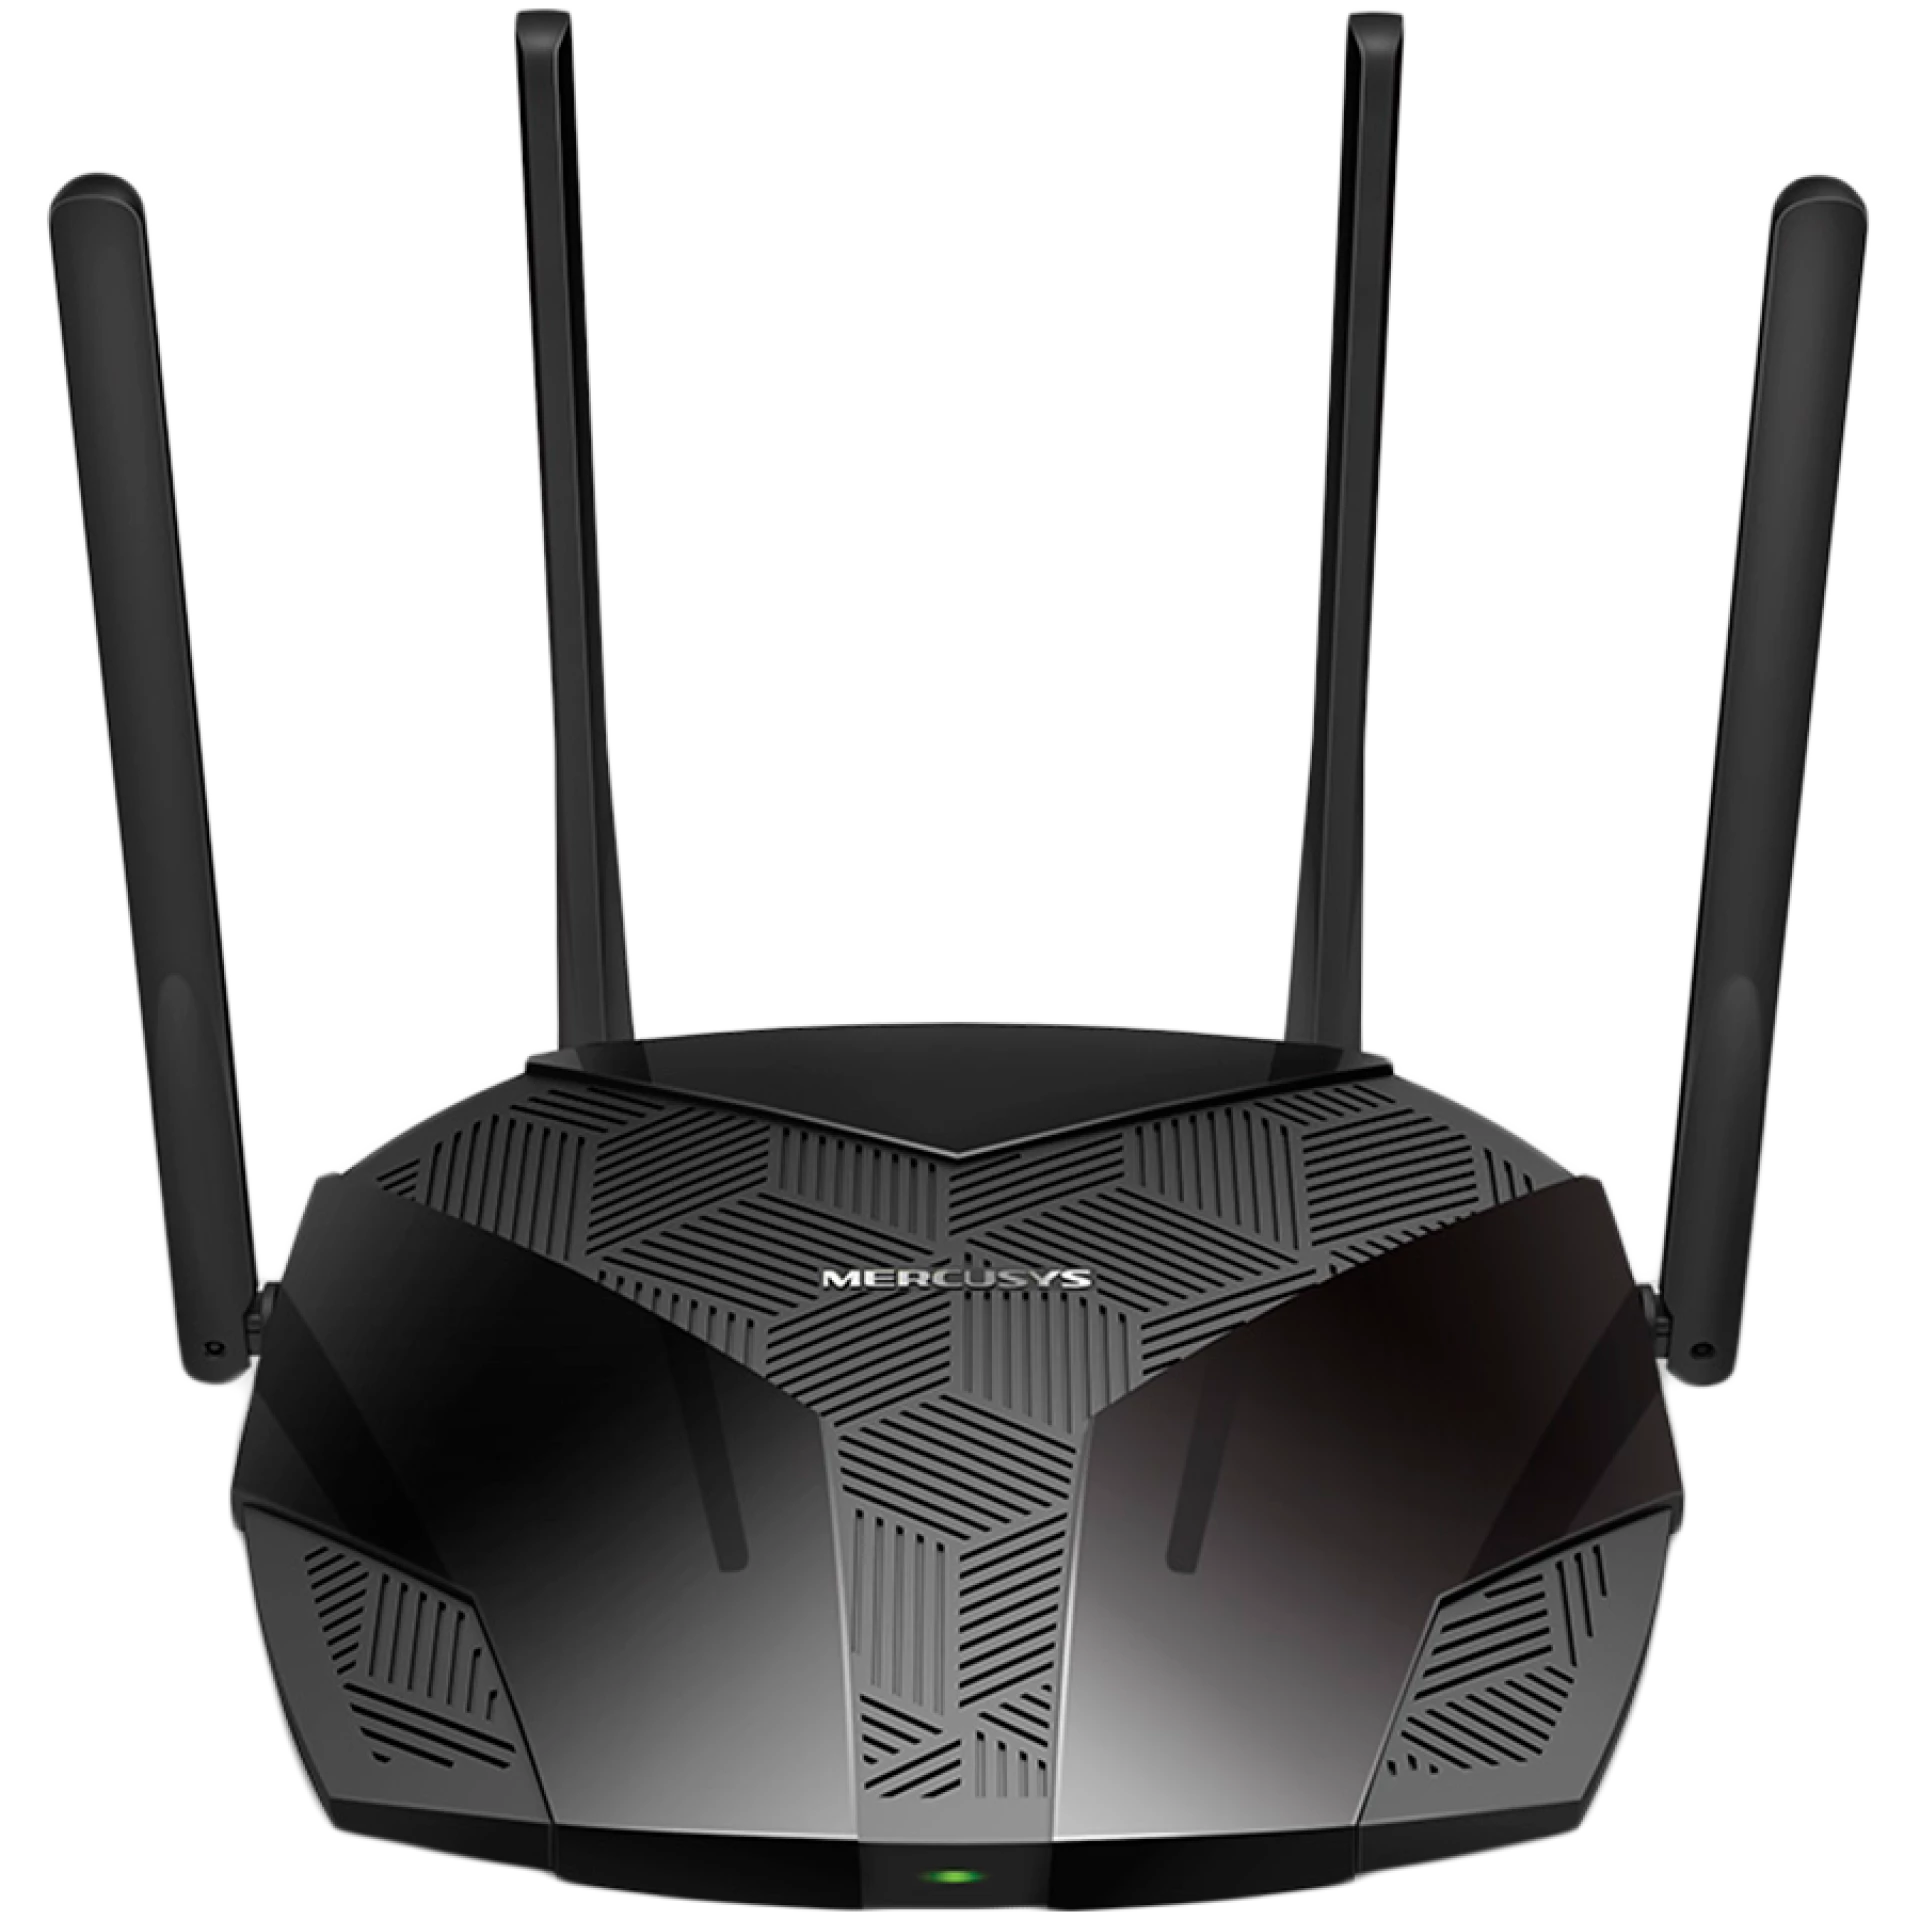 Mercusys MR80X AX3000 Dual-Band Wi-Fi 6 Router, 574 Mbps at 2.4 GHz + 2402 Mbps at 5 GHz, 4× Fixed External Antennas, 3× G LAN Ports, 1× G WAN Port, 1024-QAM, OFDMA, HE160, Router/AP mode, Beamforming, MU-MIMO, VPN server, TWT, Smart Connect, WPA3